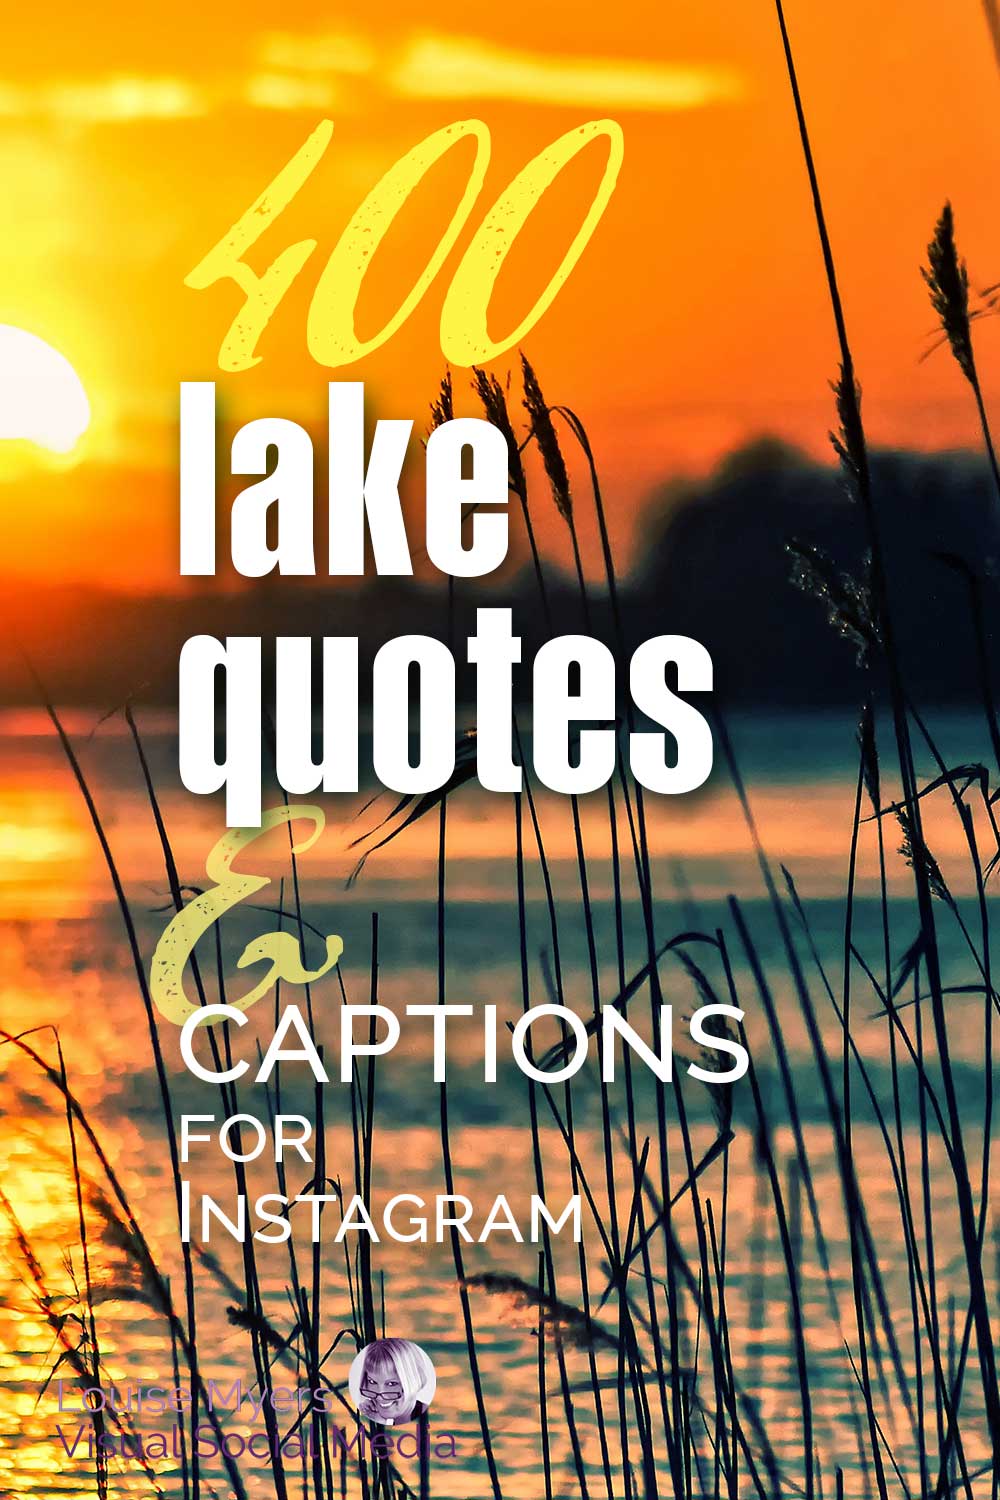 orange sunset on lake with text 400 lake quotes and captions for instagram.